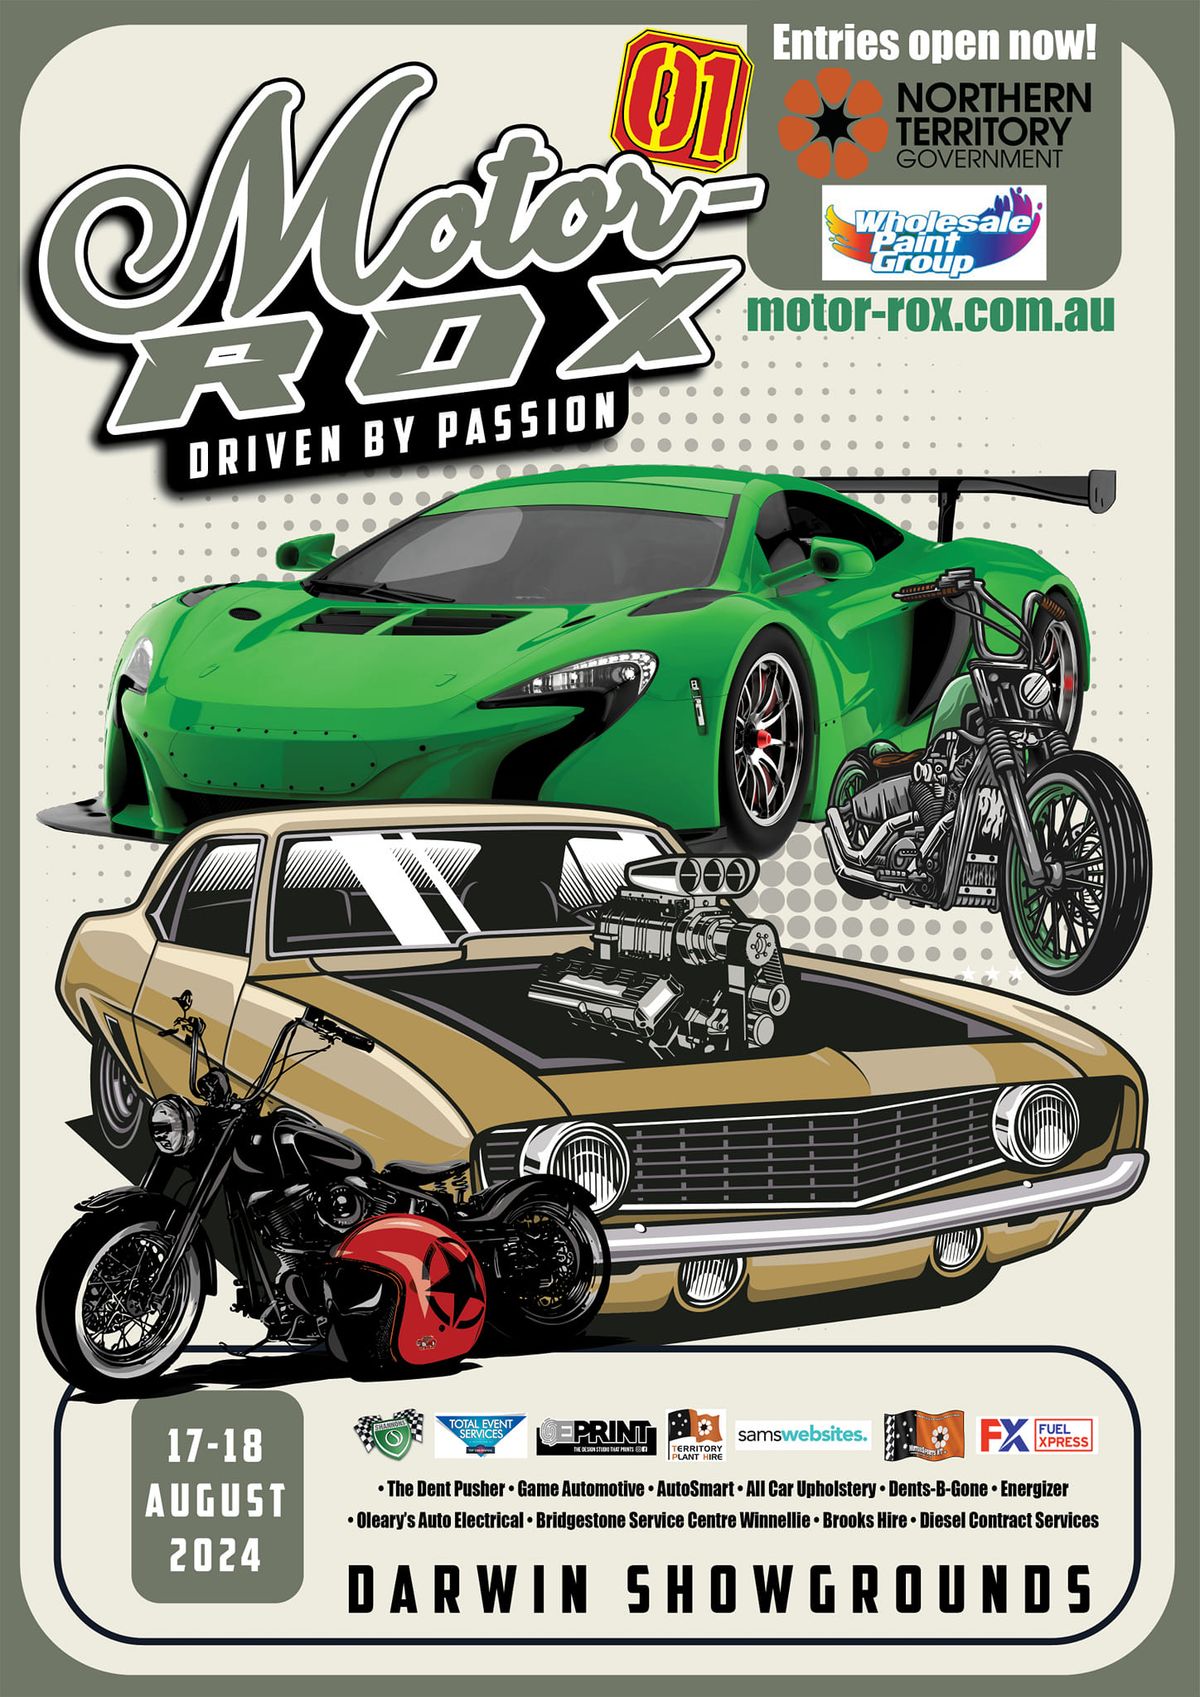 Motor-ROX "Driven by Passion" Car & Bike Show